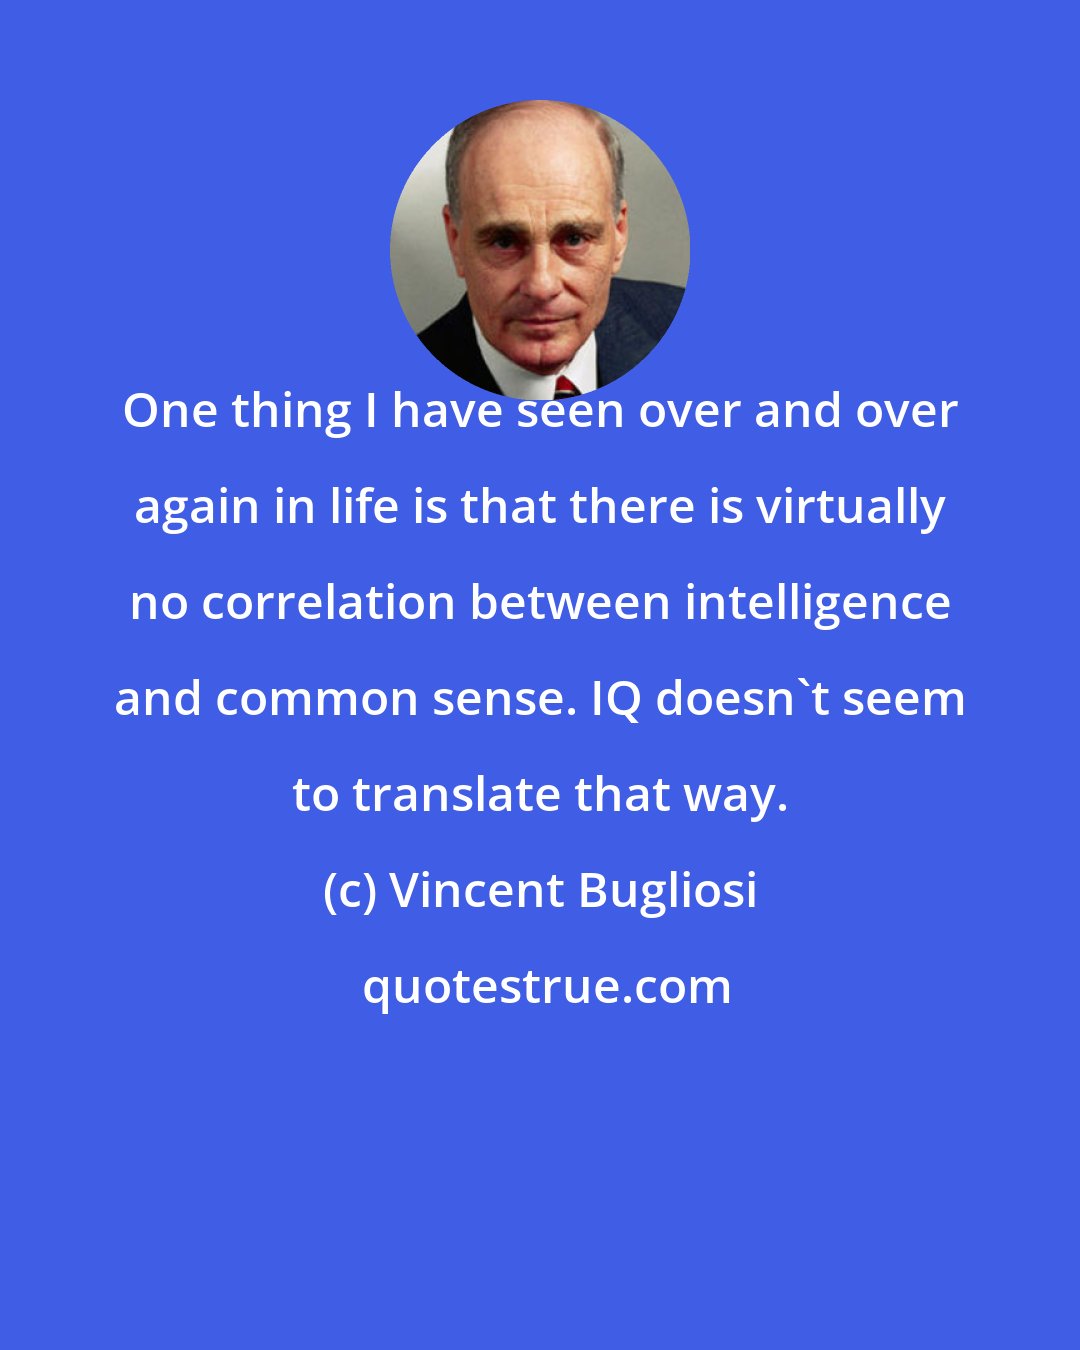 Vincent Bugliosi: One thing I have seen over and over again in life is that there is virtually no correlation between intelligence and common sense. IQ doesn't seem to translate that way.